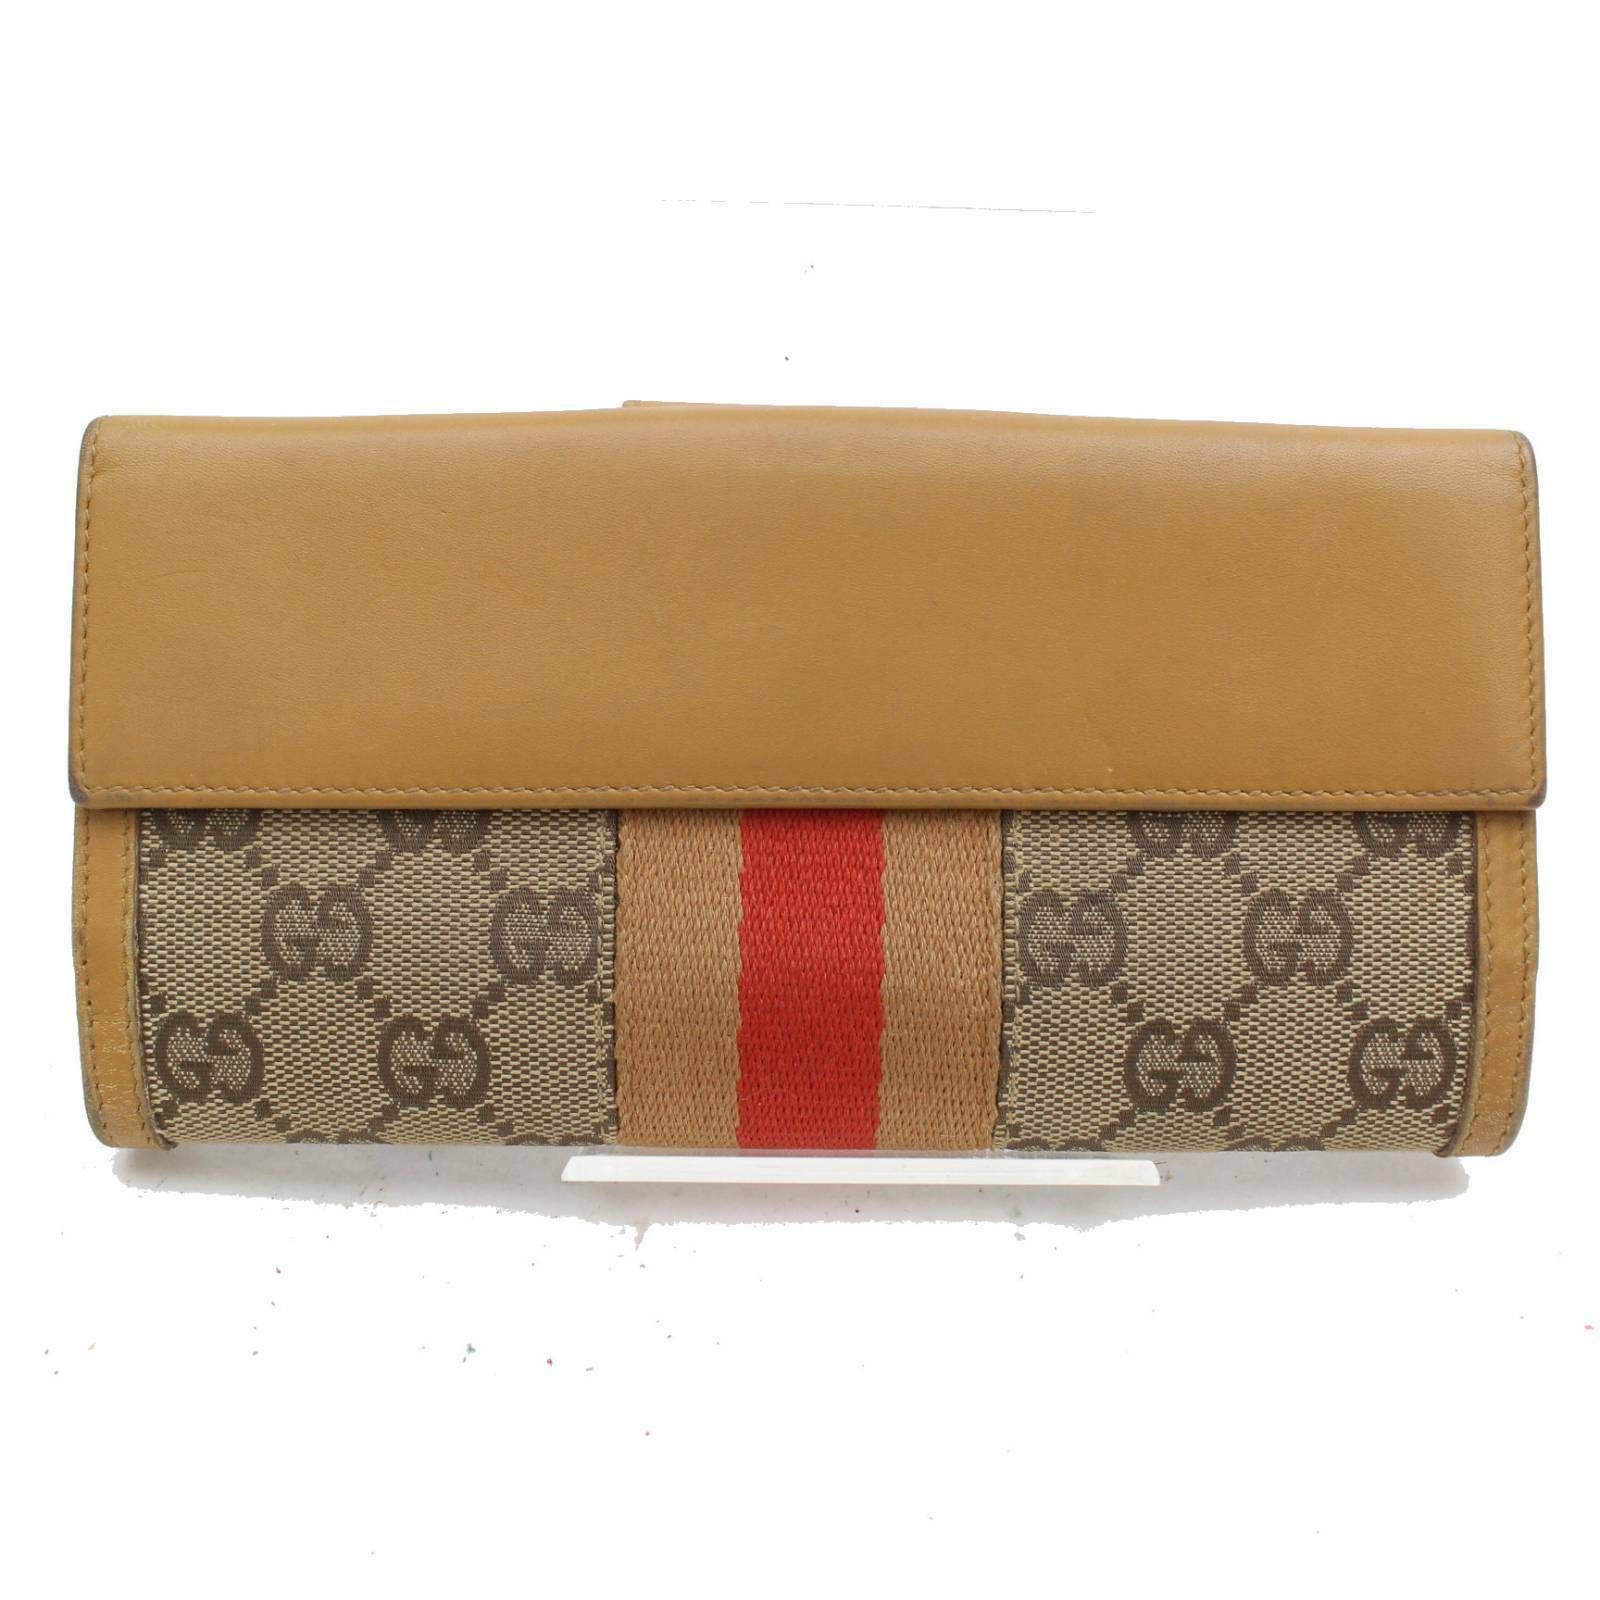 Authentic Gucci Brown Canvas Long Wallet 11339